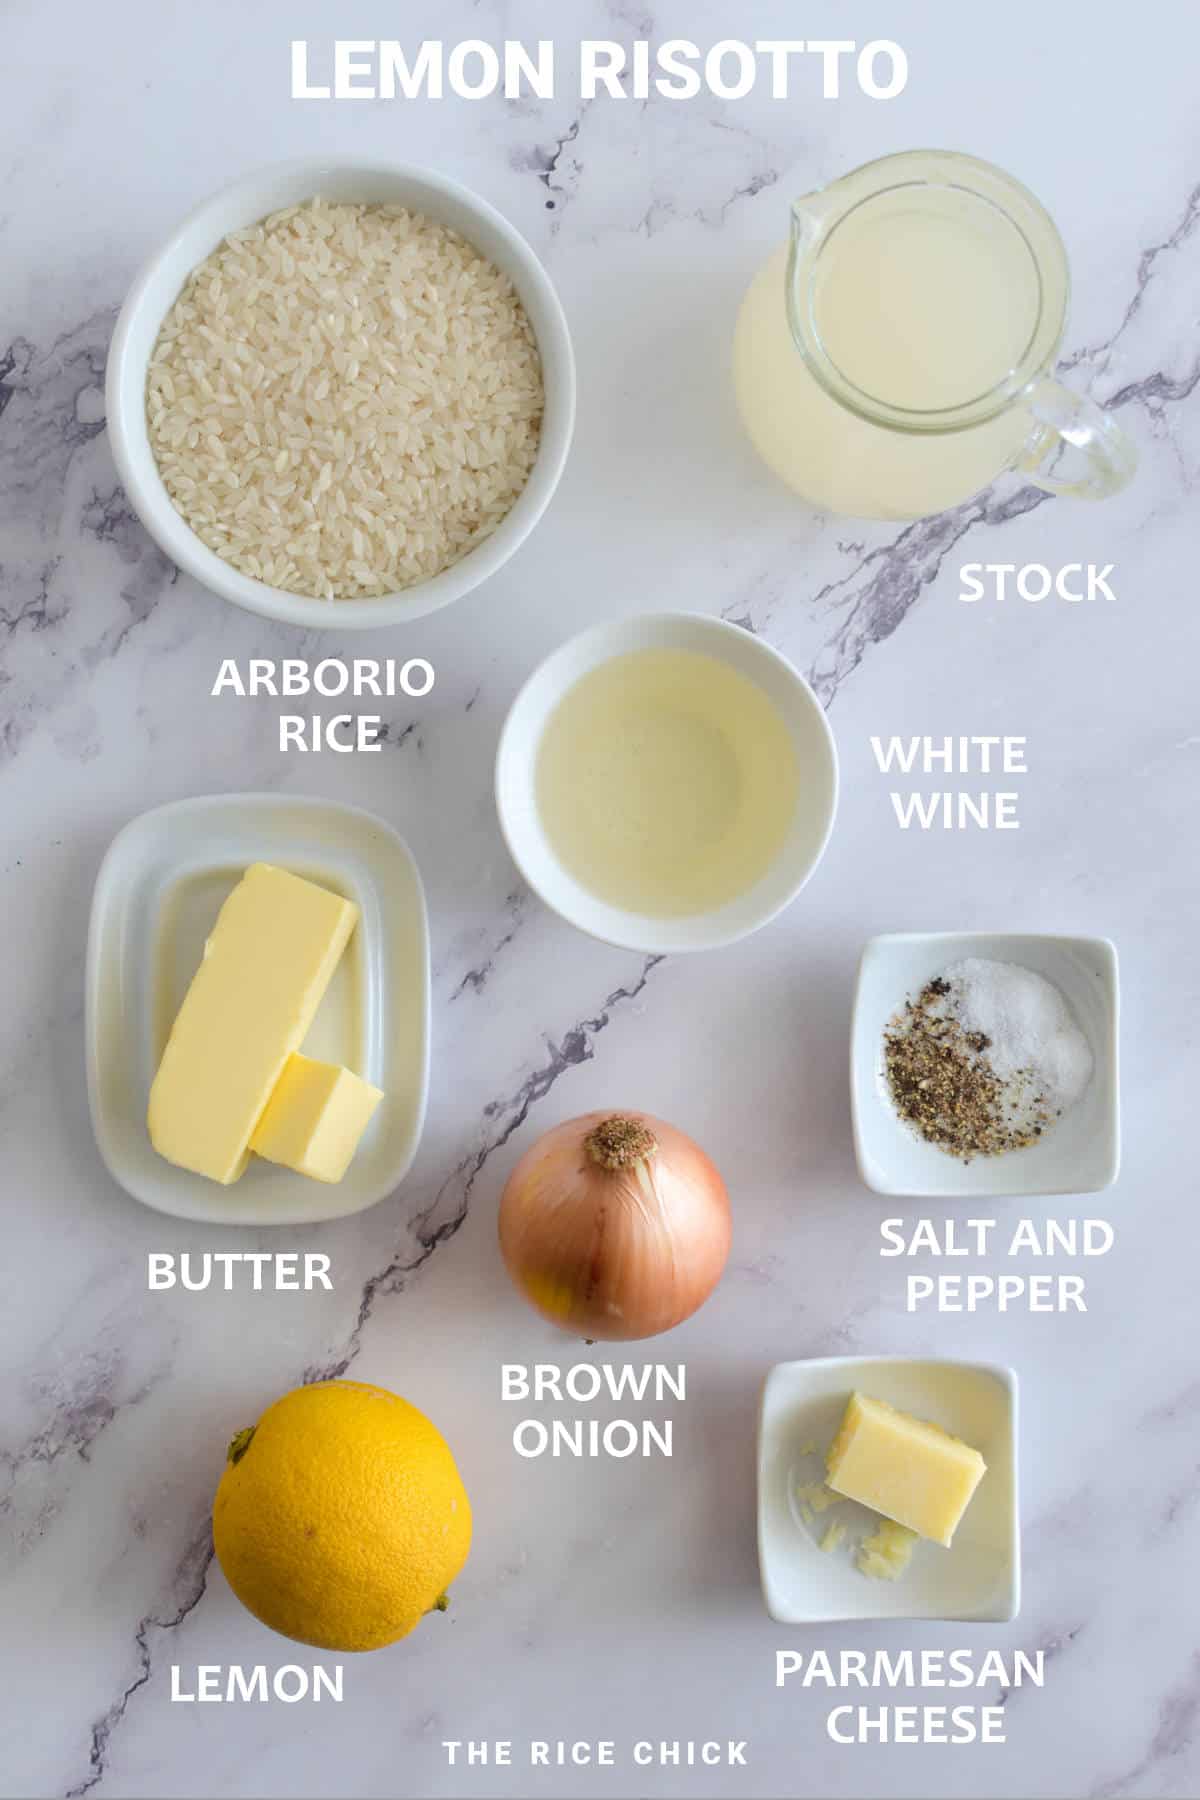 Ingredients for lemon risotto.